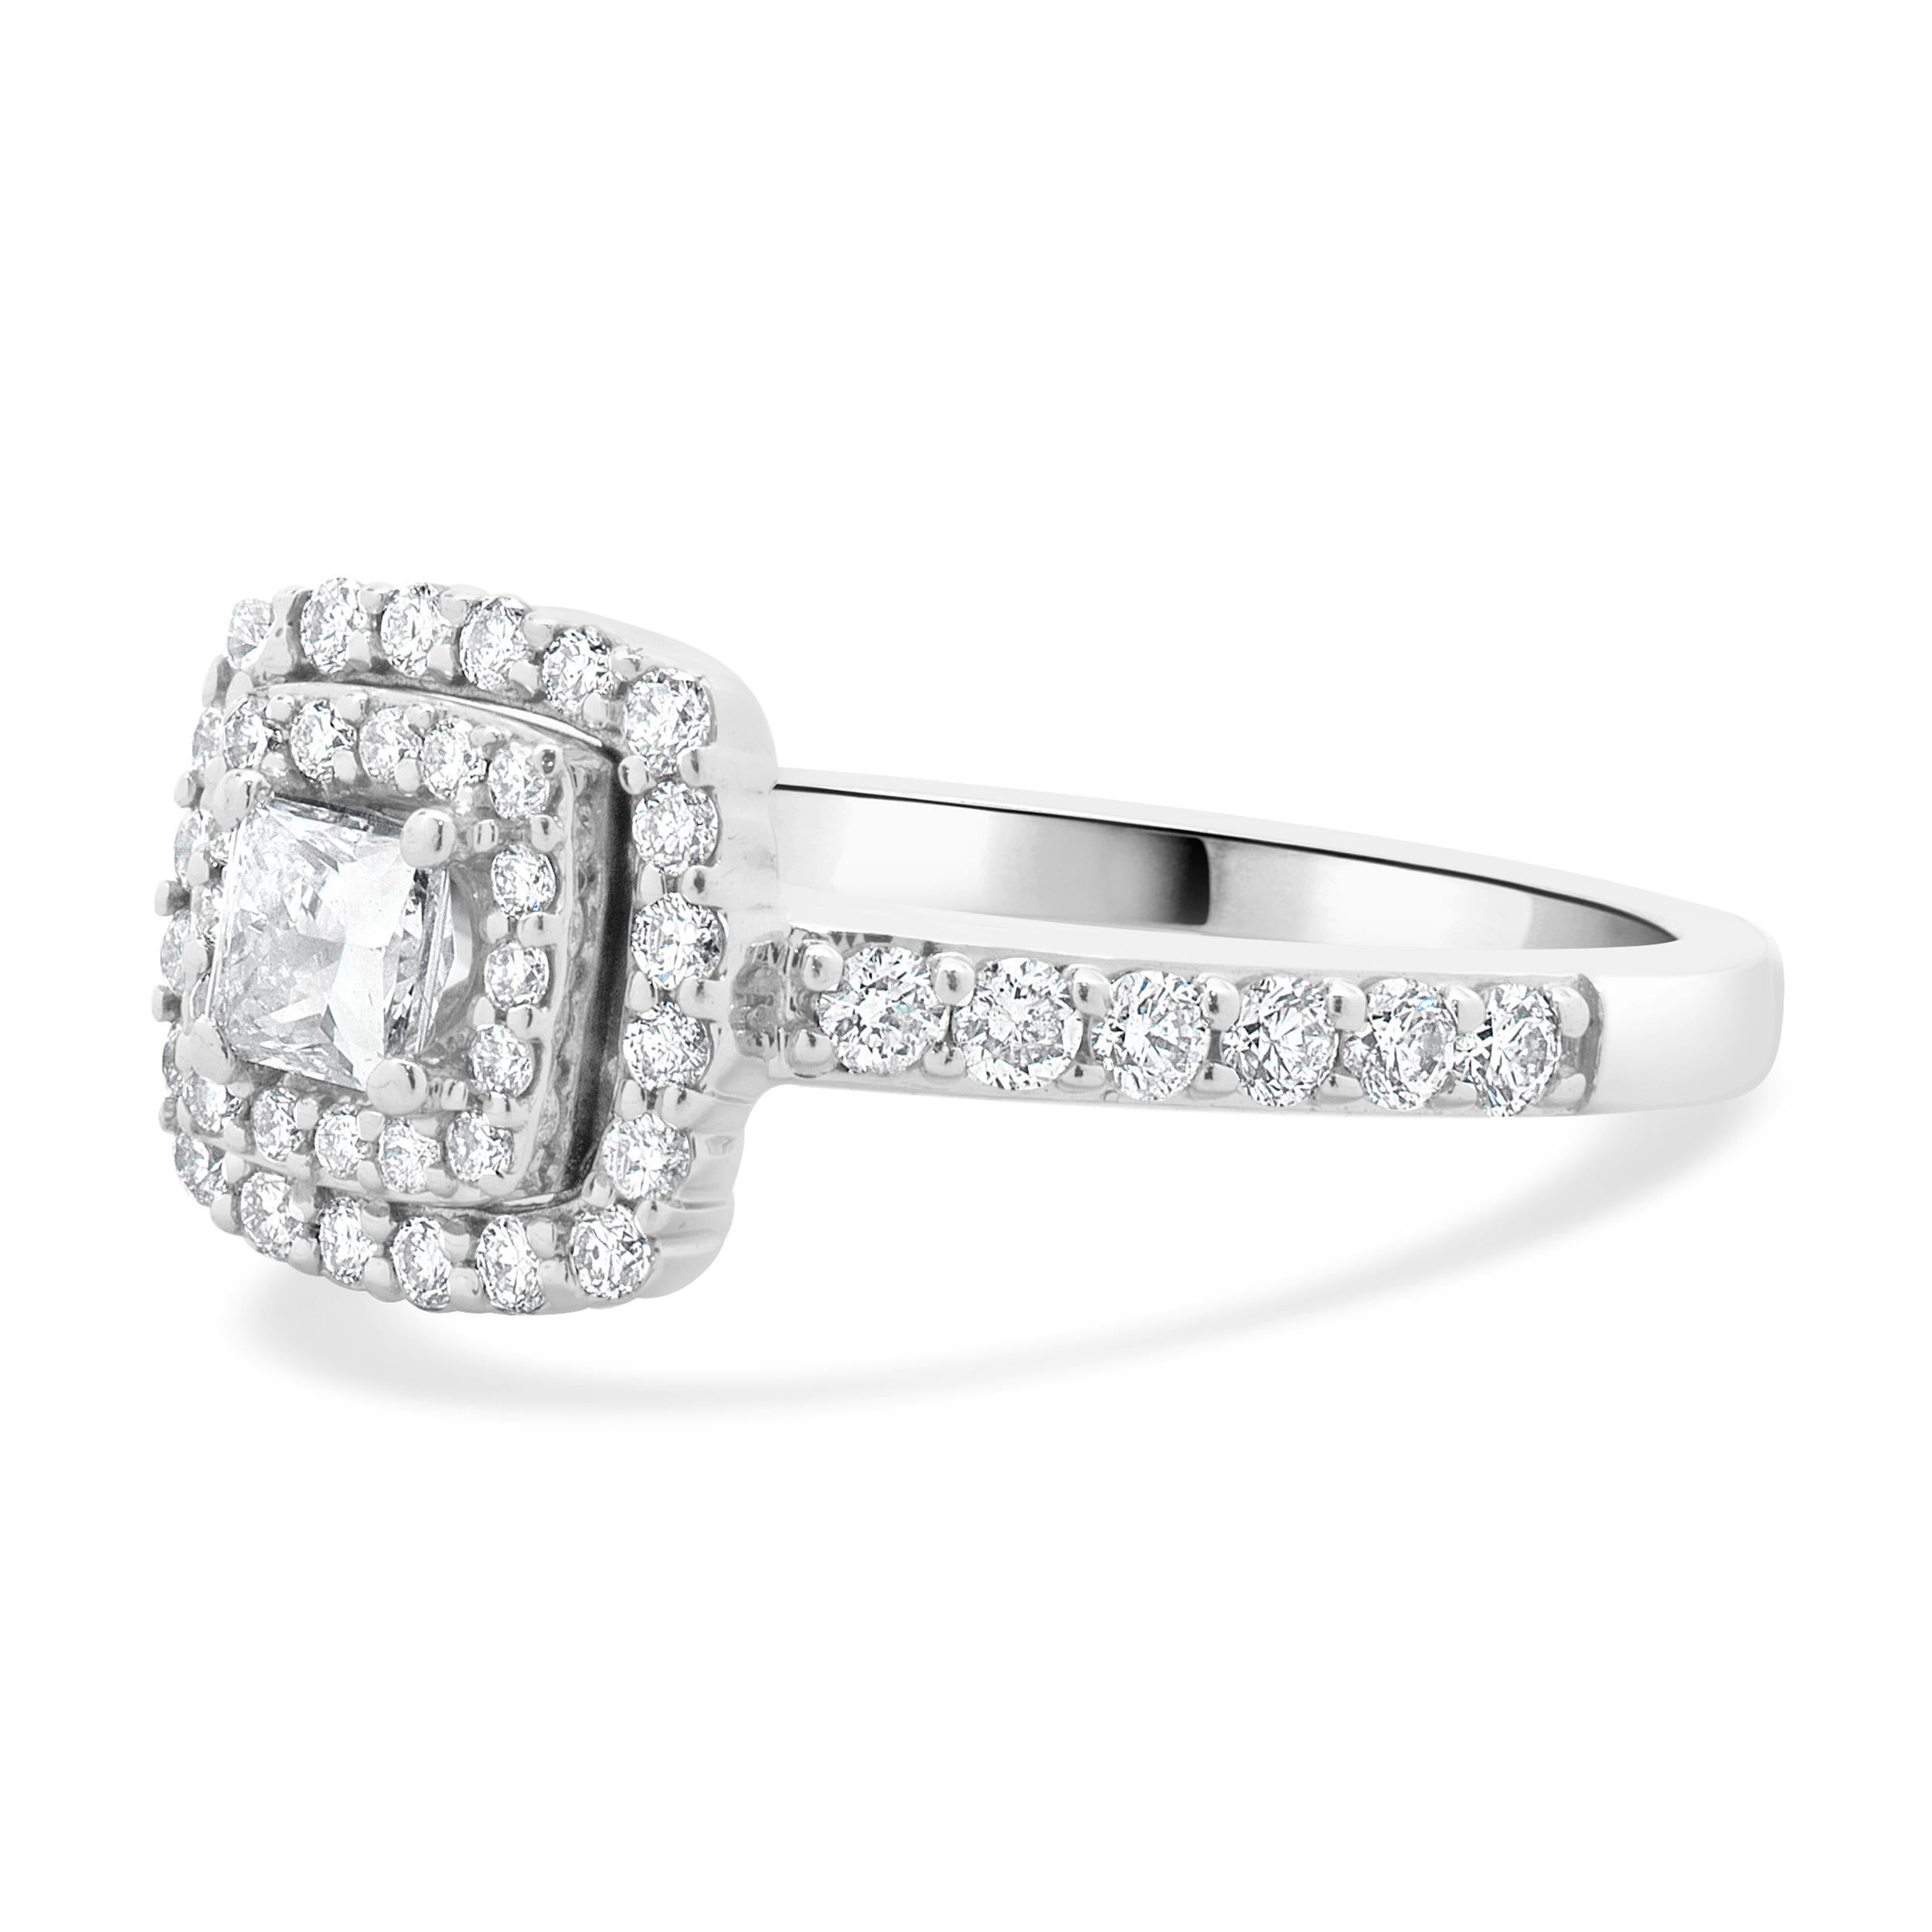 Designer: Custom
Material: 14K white gold
Diamond: 1 princess cut = 0.25ct
Color: I
Clarity: I1
Diamond: 48 round brilliant cut = 0.36cttw
Color: G  / H 
Clarity: SI1
Dimensions: ring top measures 9mm wide
Ring Size: 5 (complimentary sizing